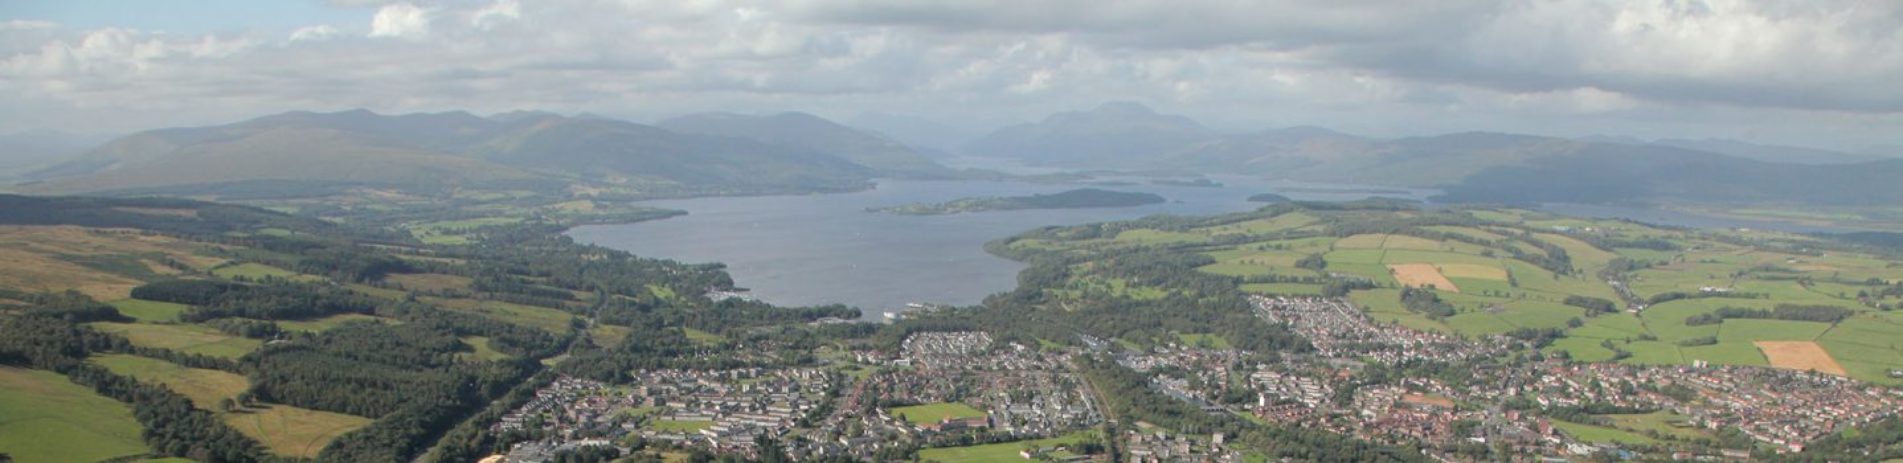 aerial-view-of-balloch-and-south-shore-of-loch-lomond-with-mountains-in-the-distance